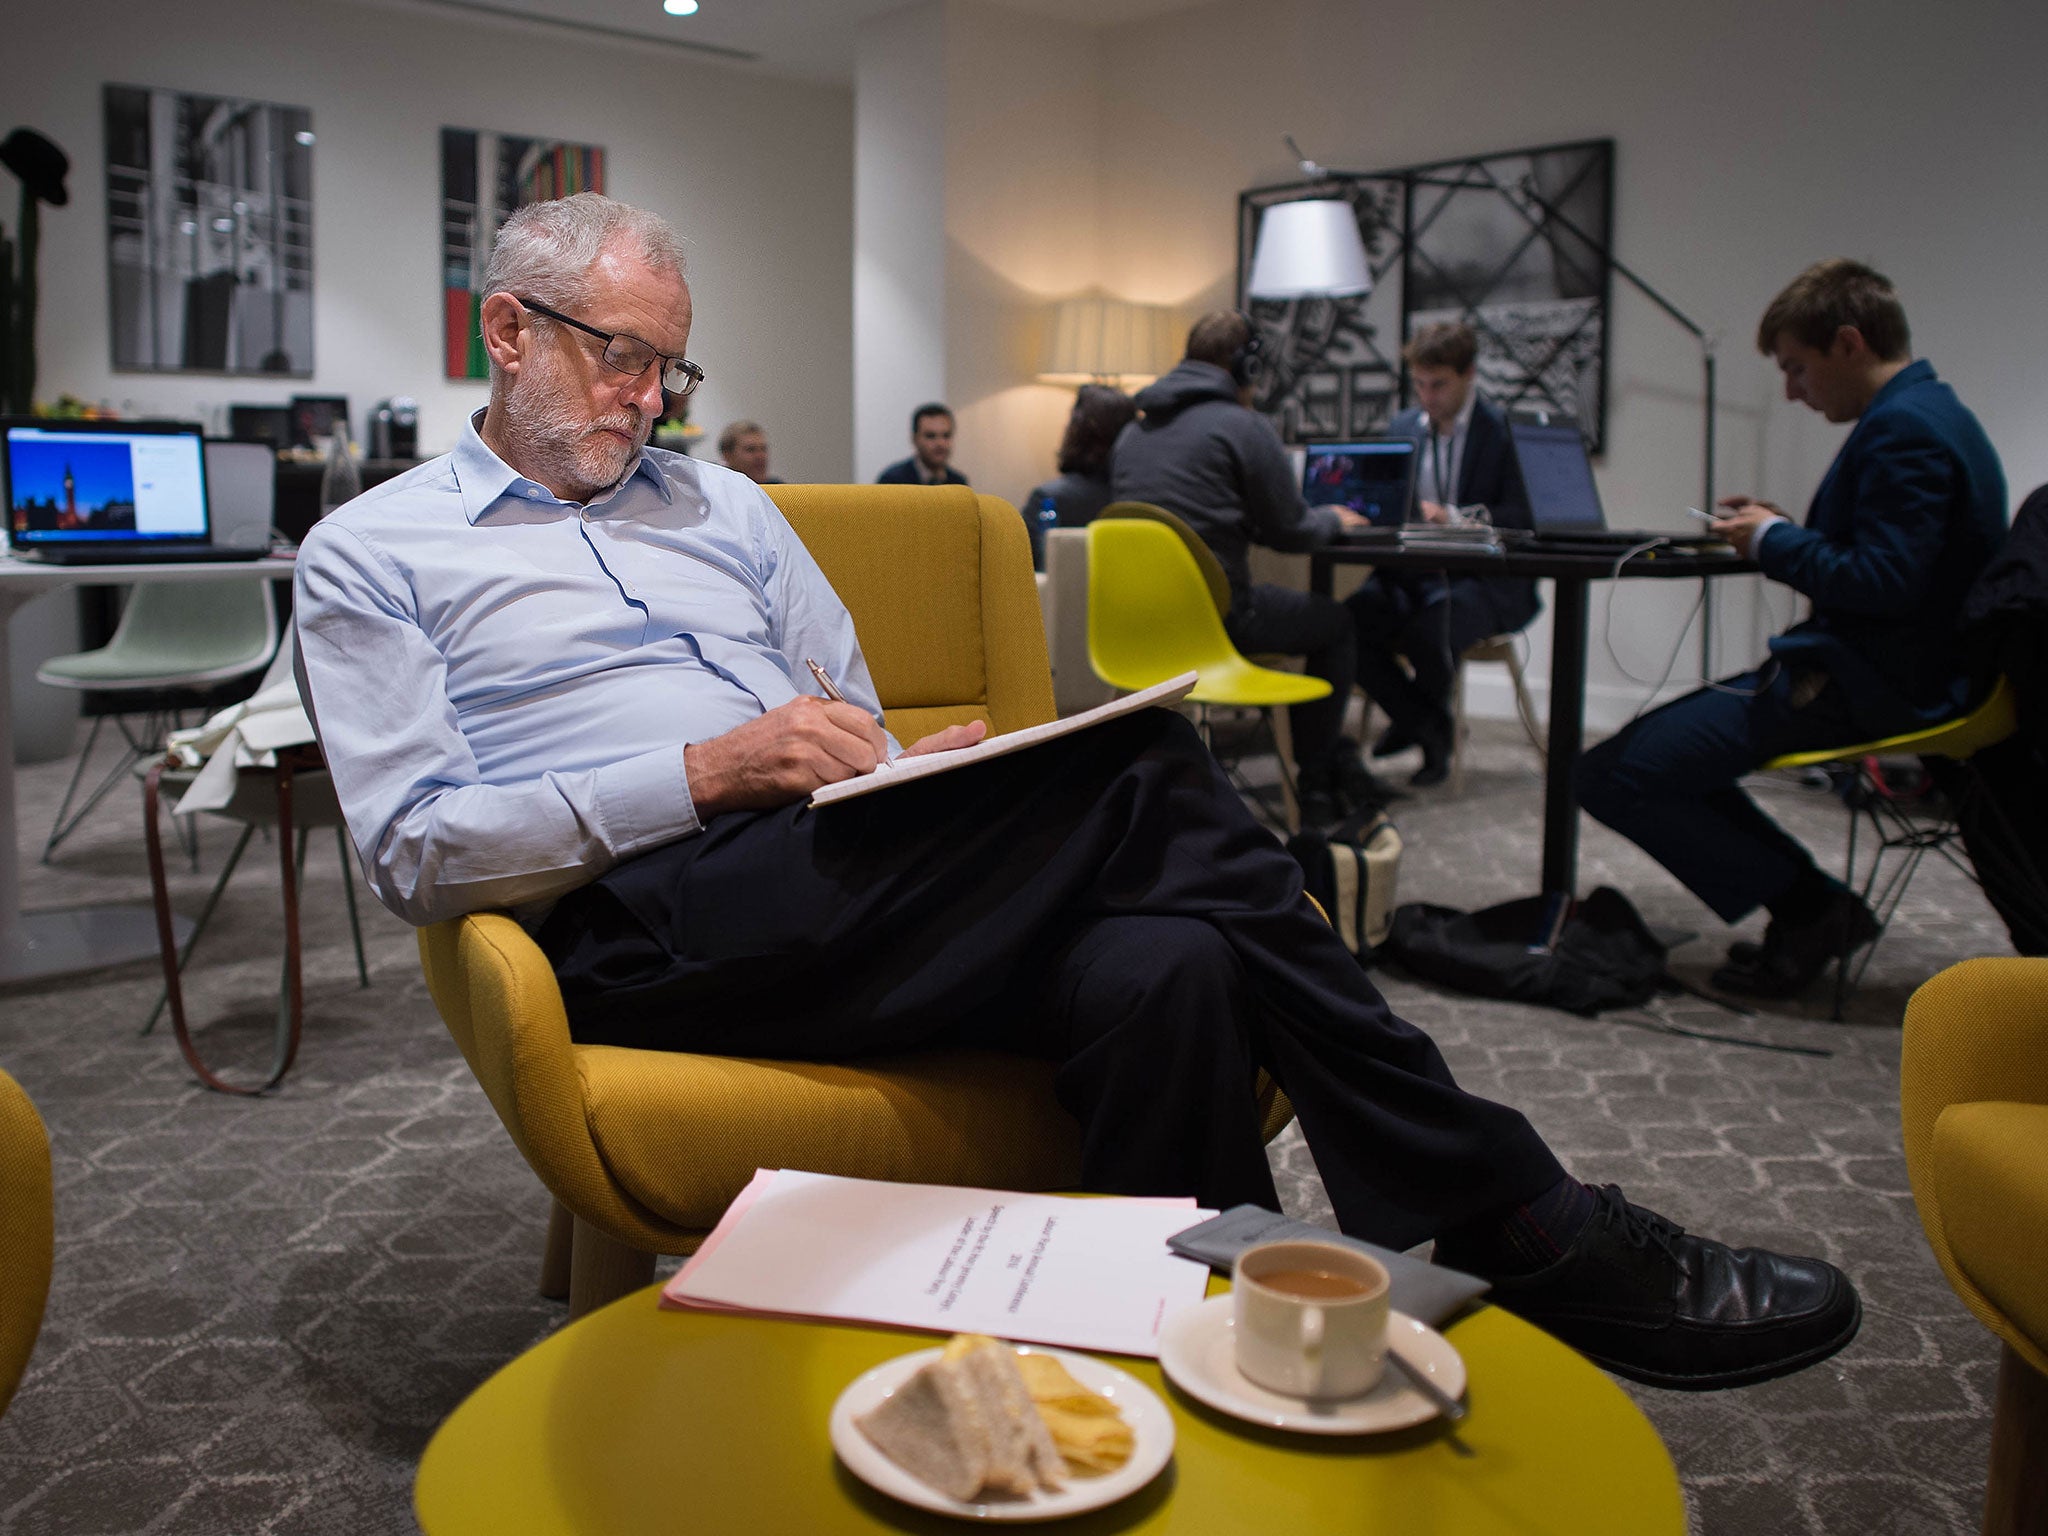 The Labour leader prepares his keynote speech at his hotel, which he will deliver at the Labour Party conference on Wednesday